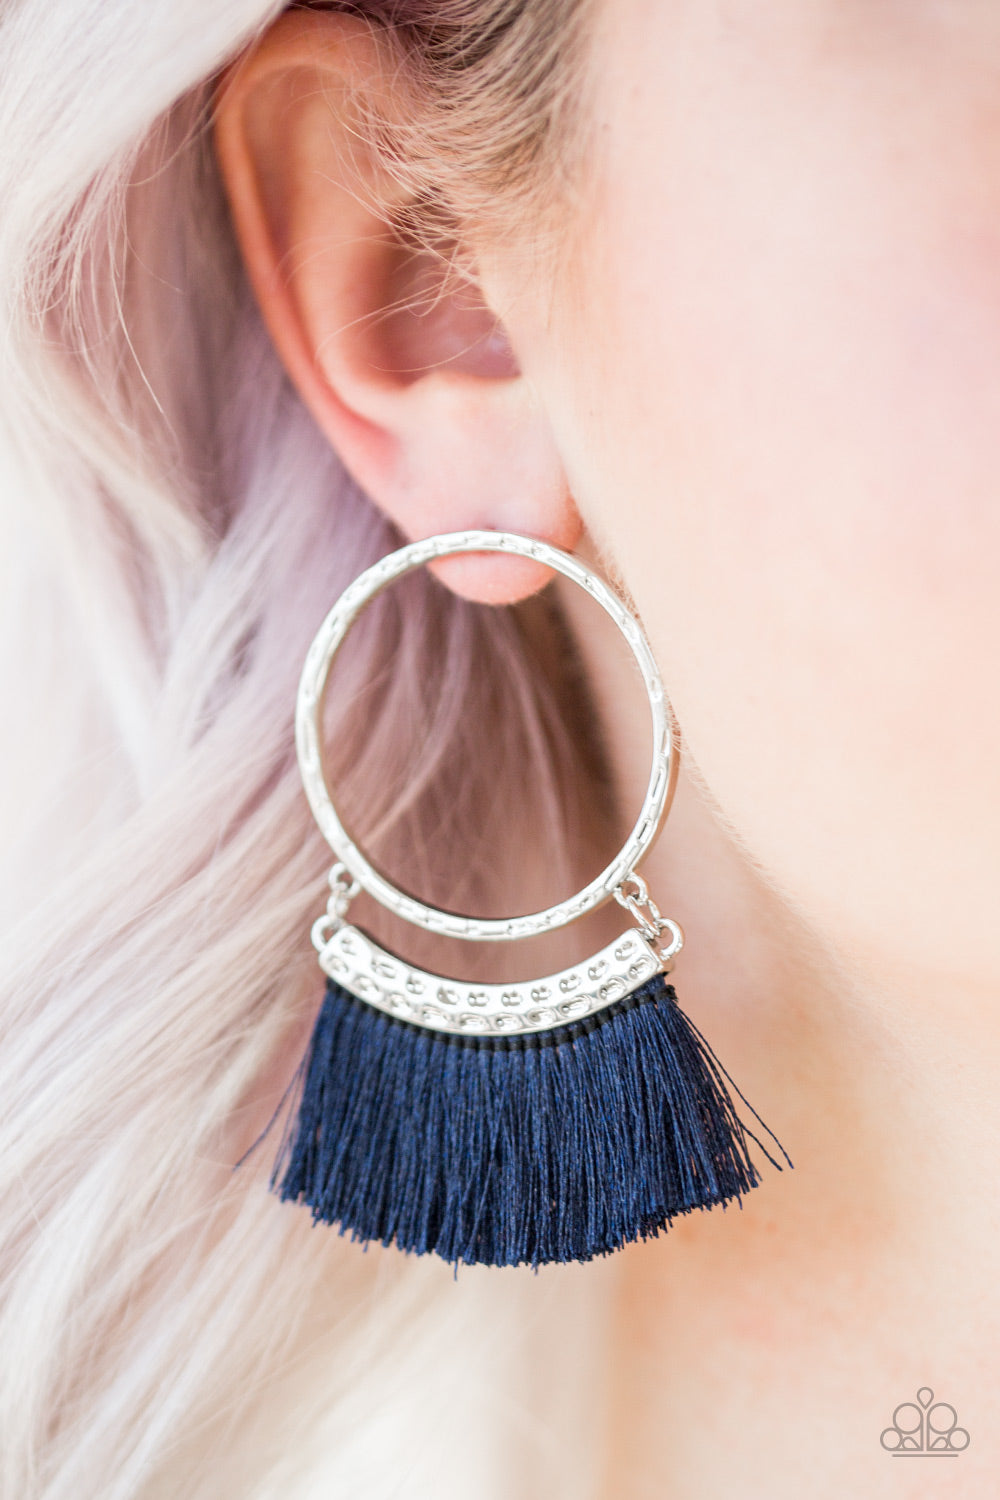 This Is Sparta Blue-Earrings